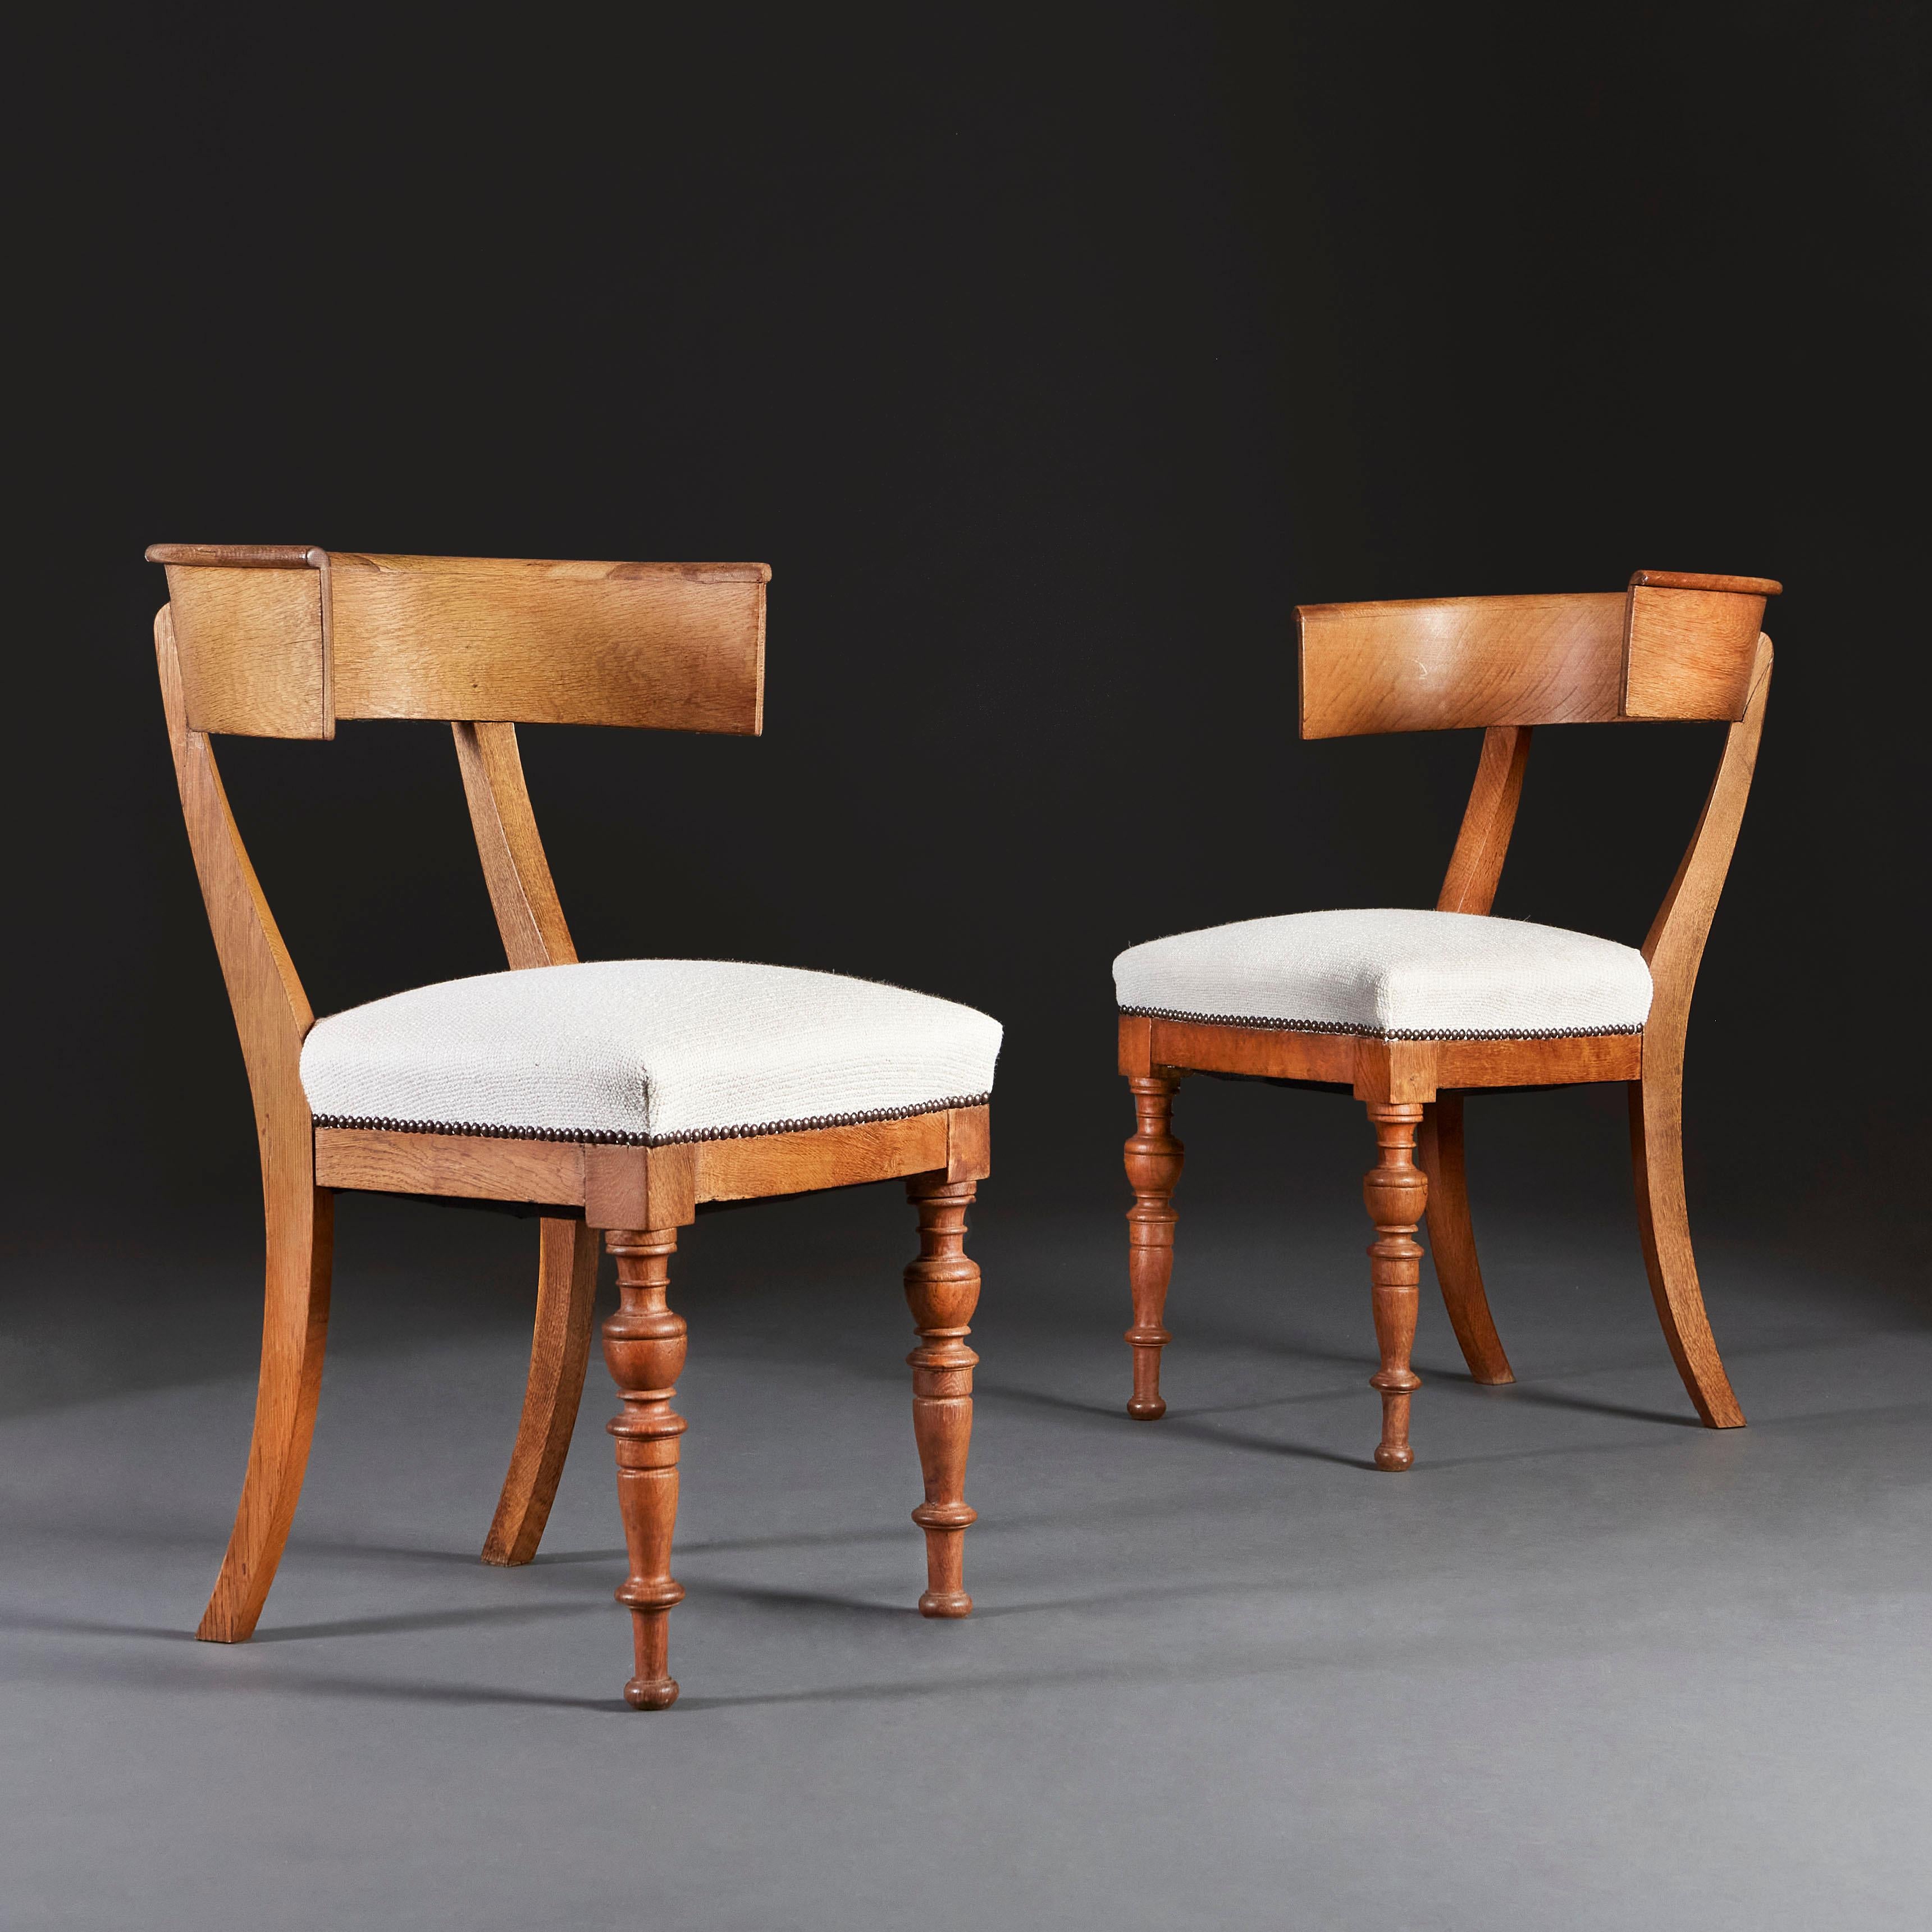 A pair of early 19th century oak Klismos chairs with curved backs, turned front legs and splayed back legs.